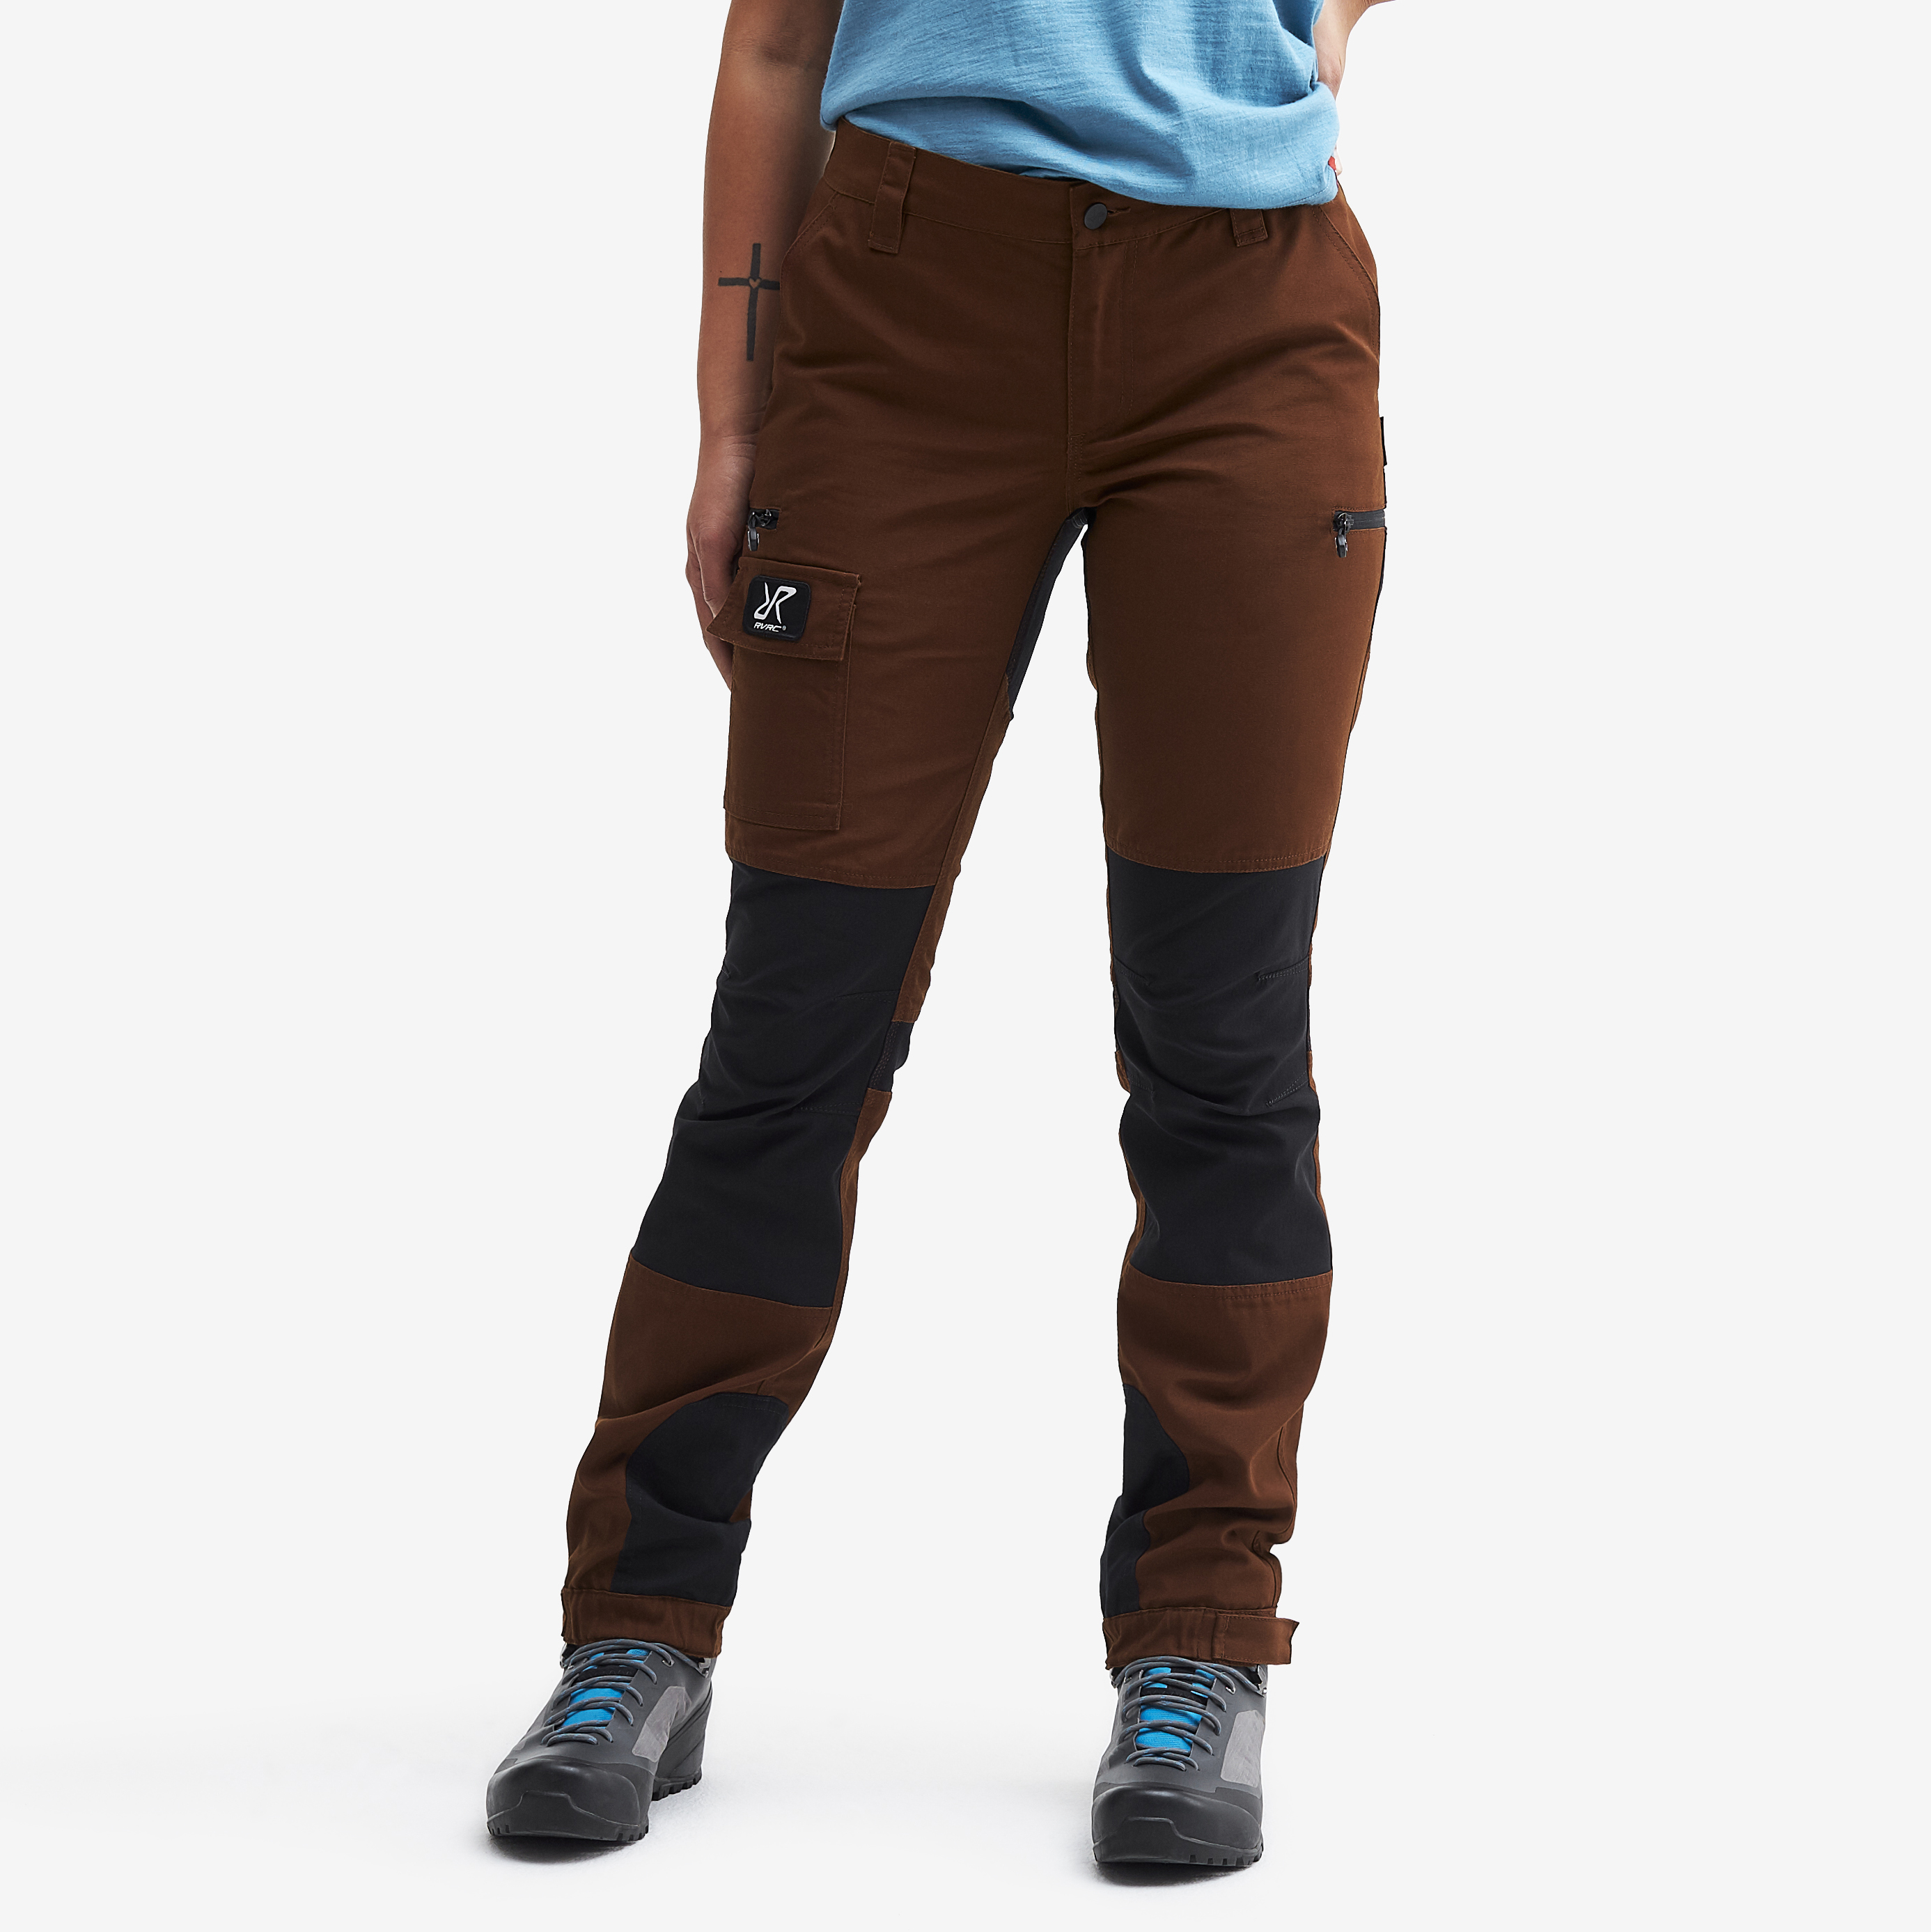 Nordwand Pants Espresso Brown Femme